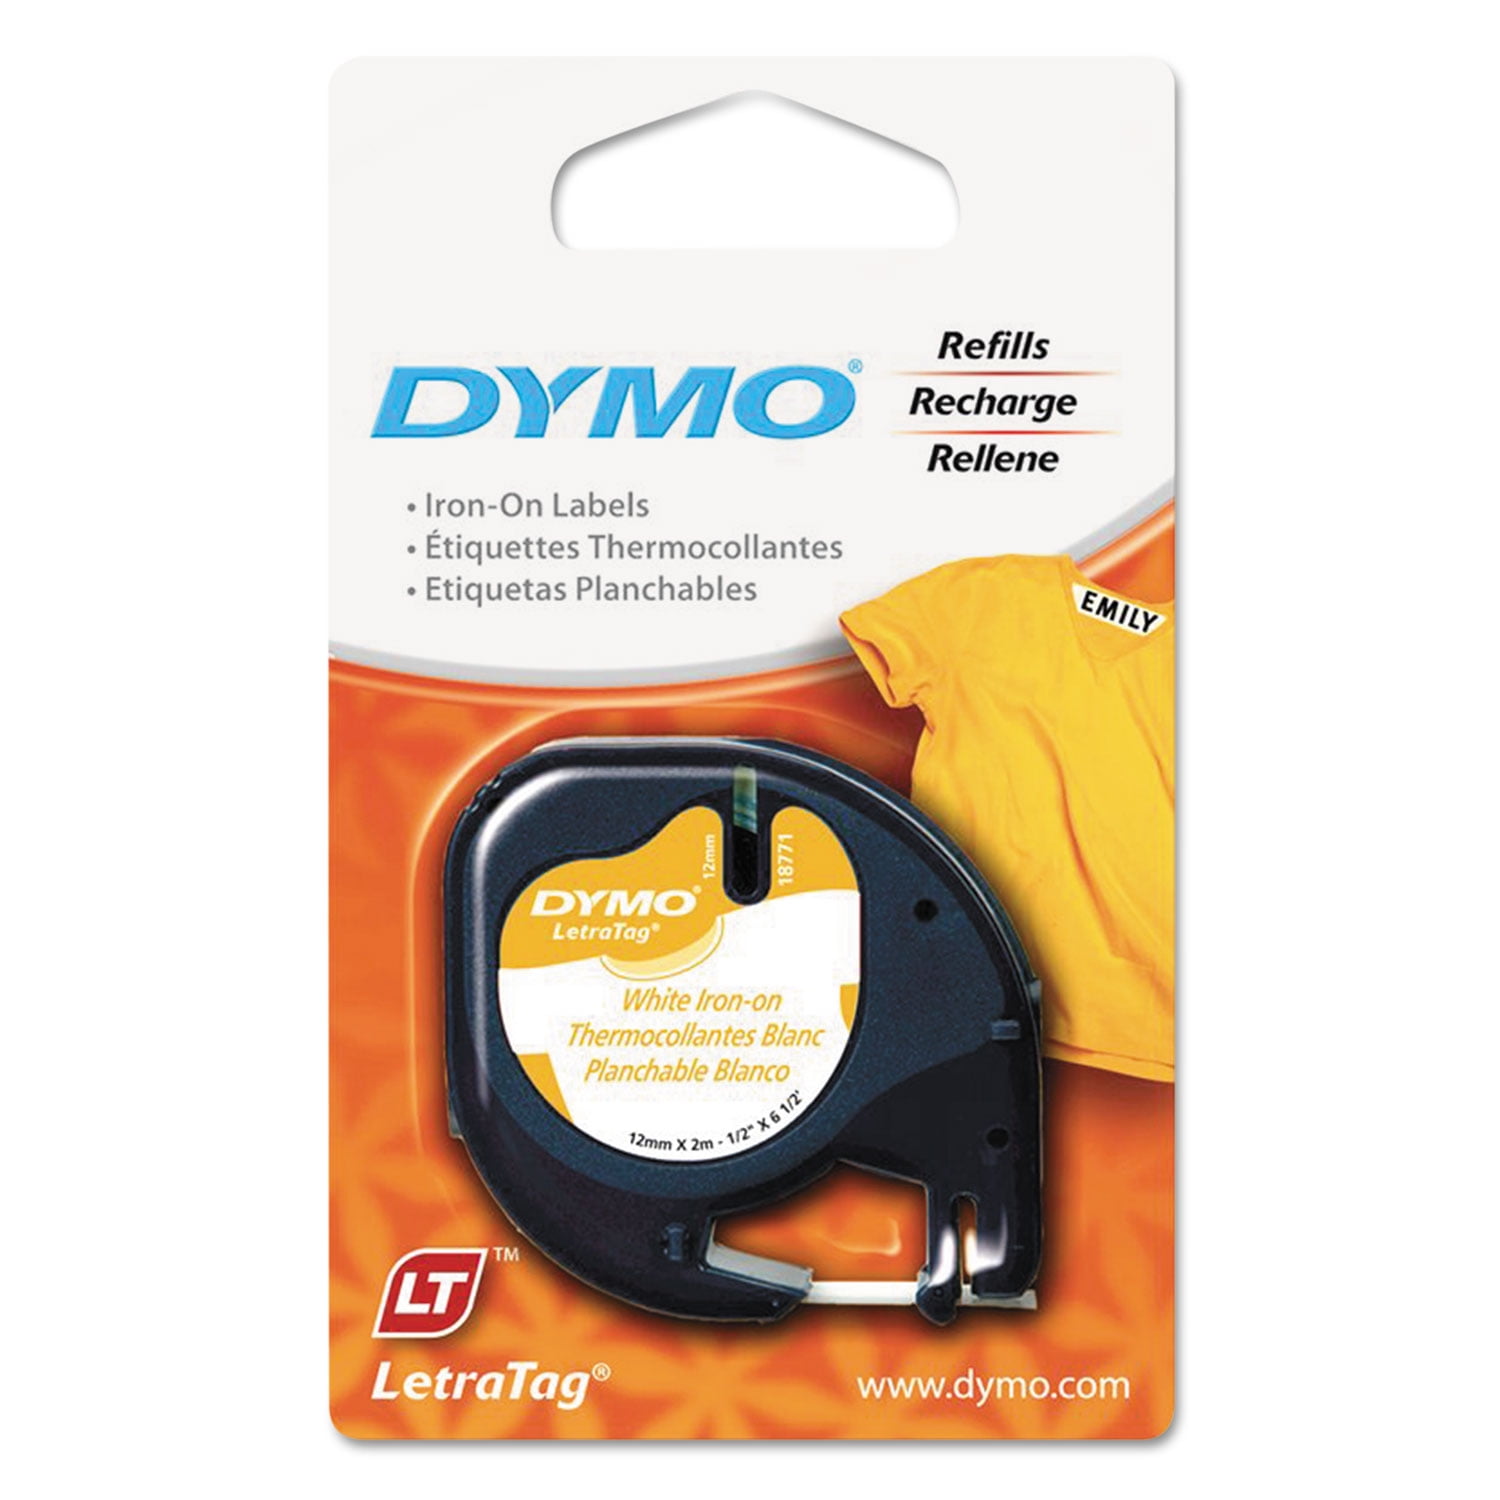 4 GENUINE Dymo Letratag Iron on Labels 